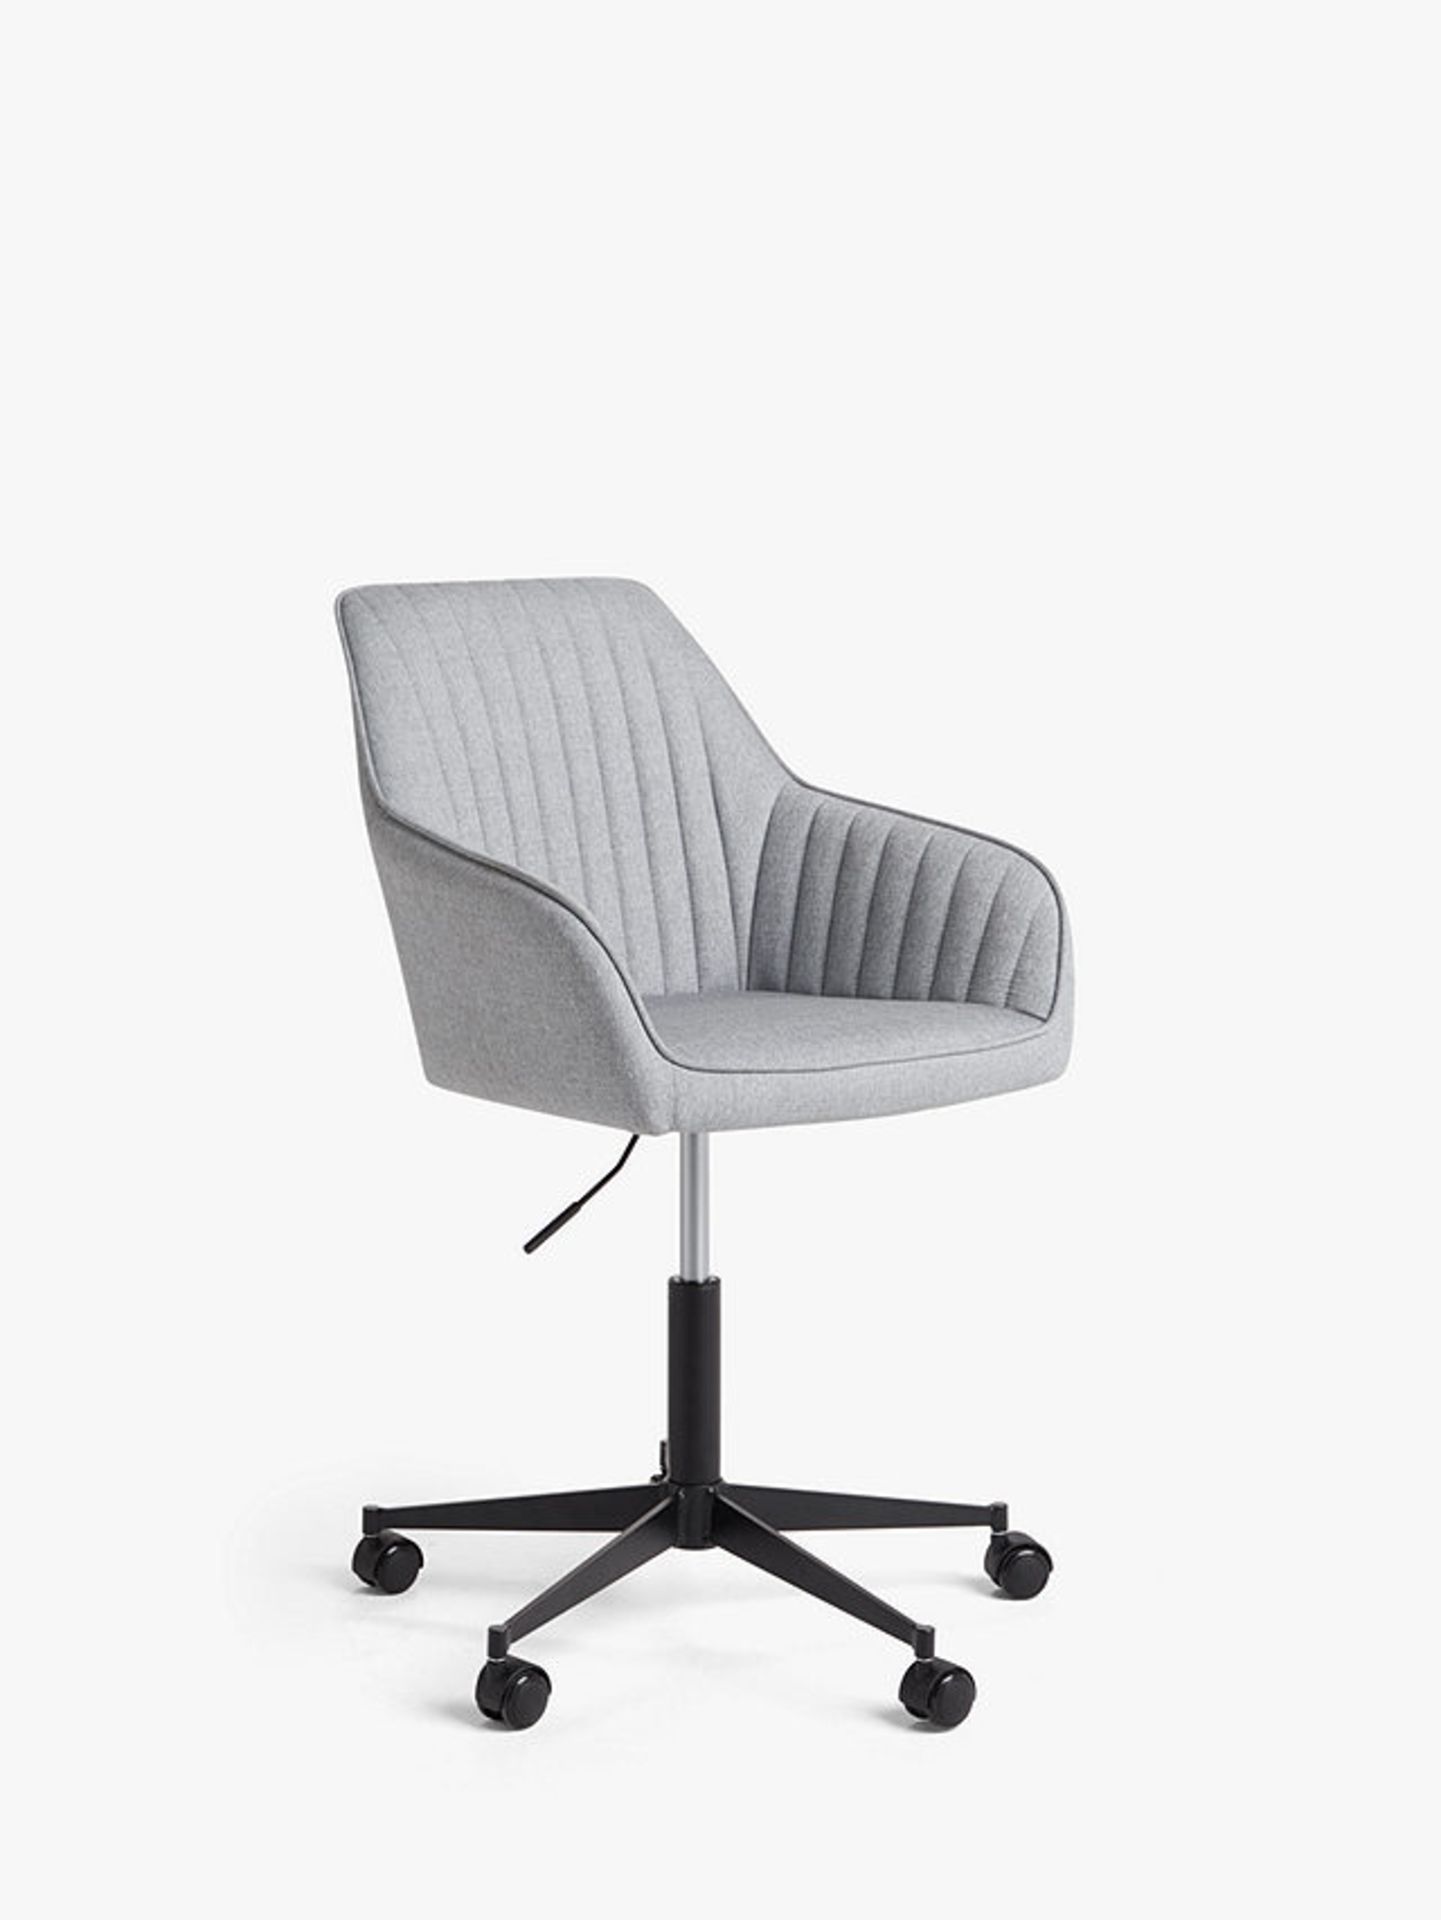 John Lewis Toronto Office Chair Grey RRP 189.00 This office chair provides a comfortable seating